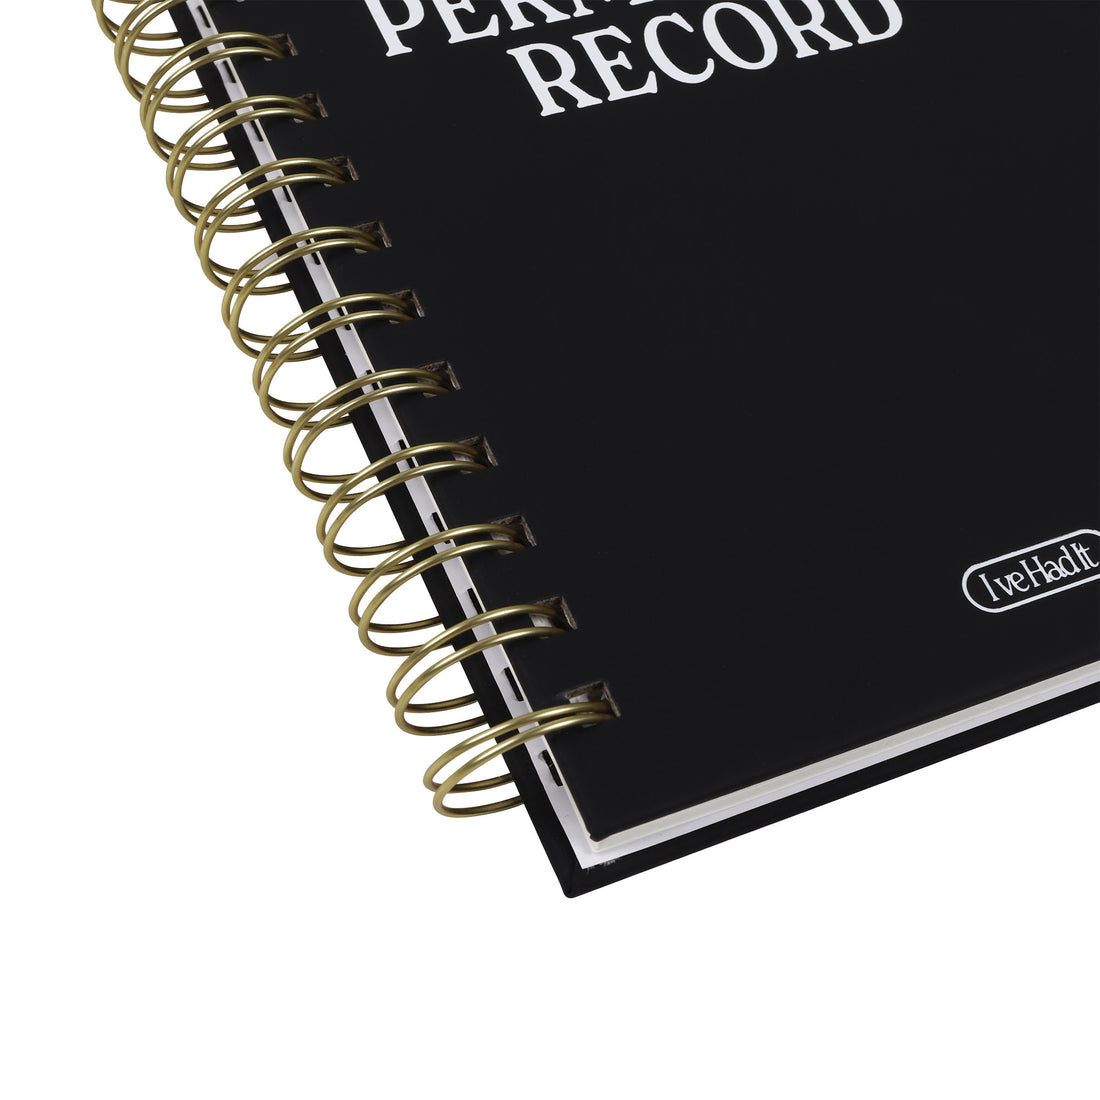 Permanent Record Notebook